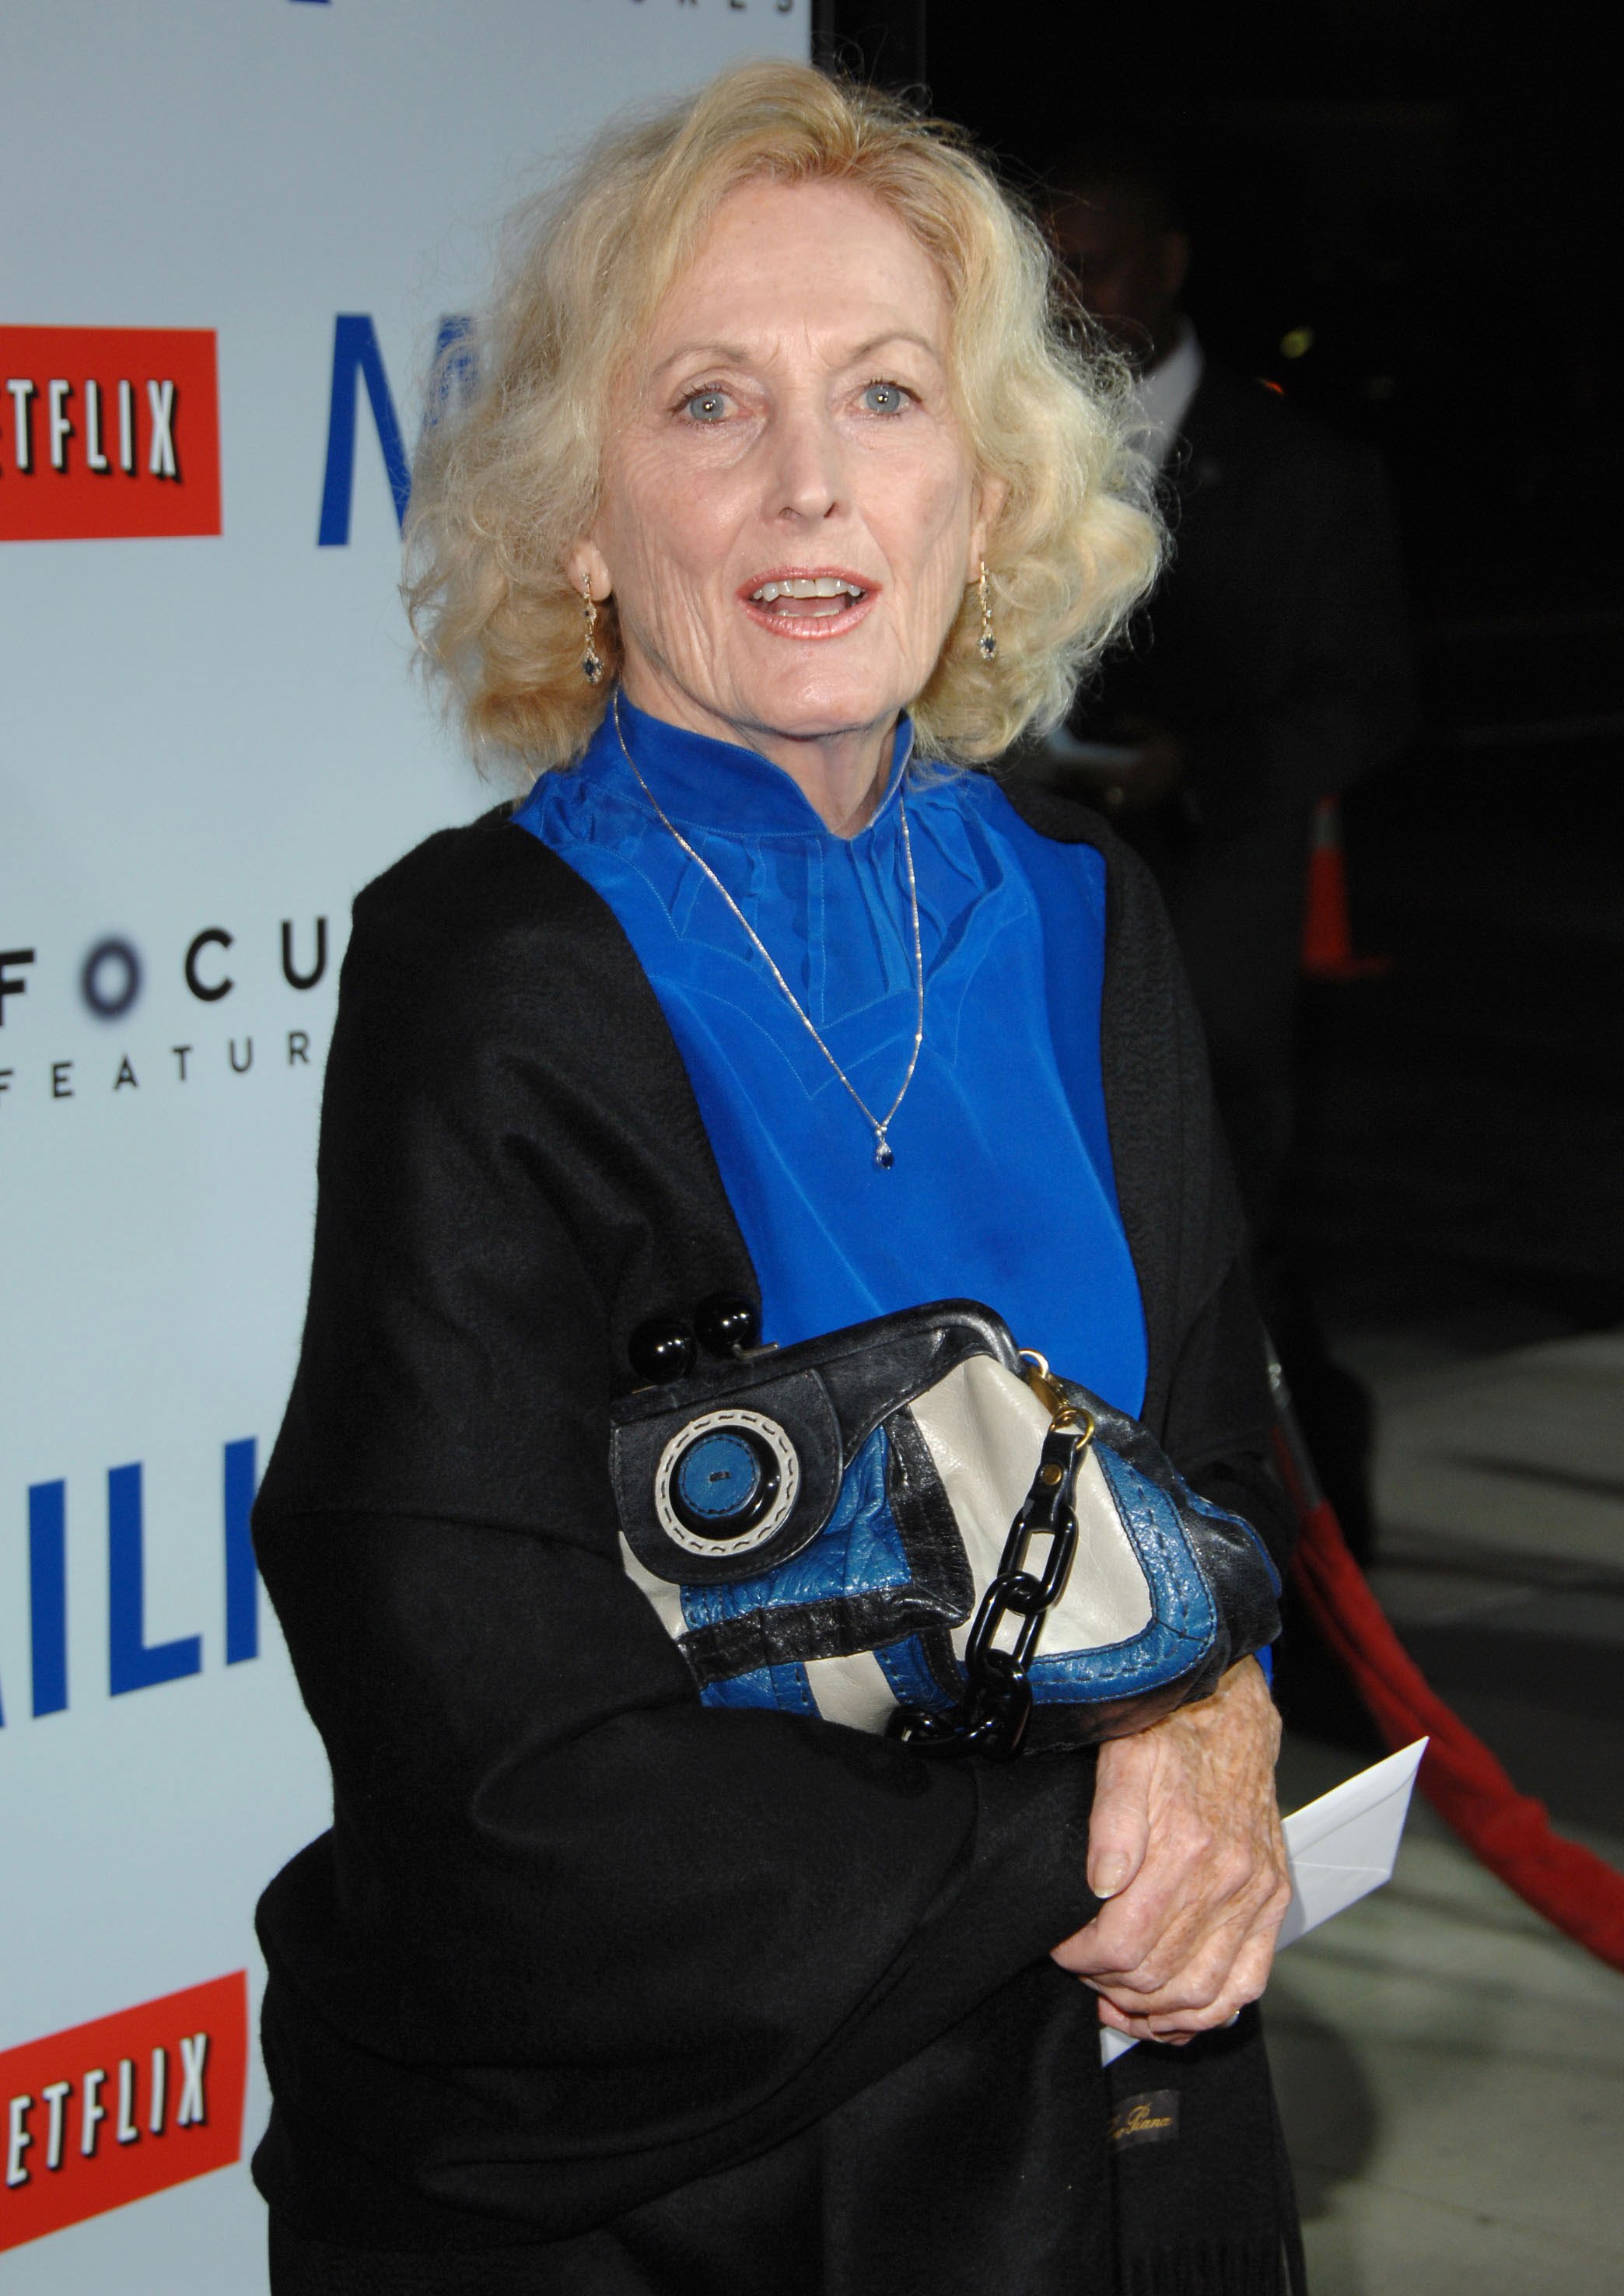 Eileen Ryan arrives at the Los Angeles Premiere of "Milk" at the Academy of Motion Pictures Arts and Sciences on November 13, 2008, in Beverly Hills, California. | Source: Getty Images